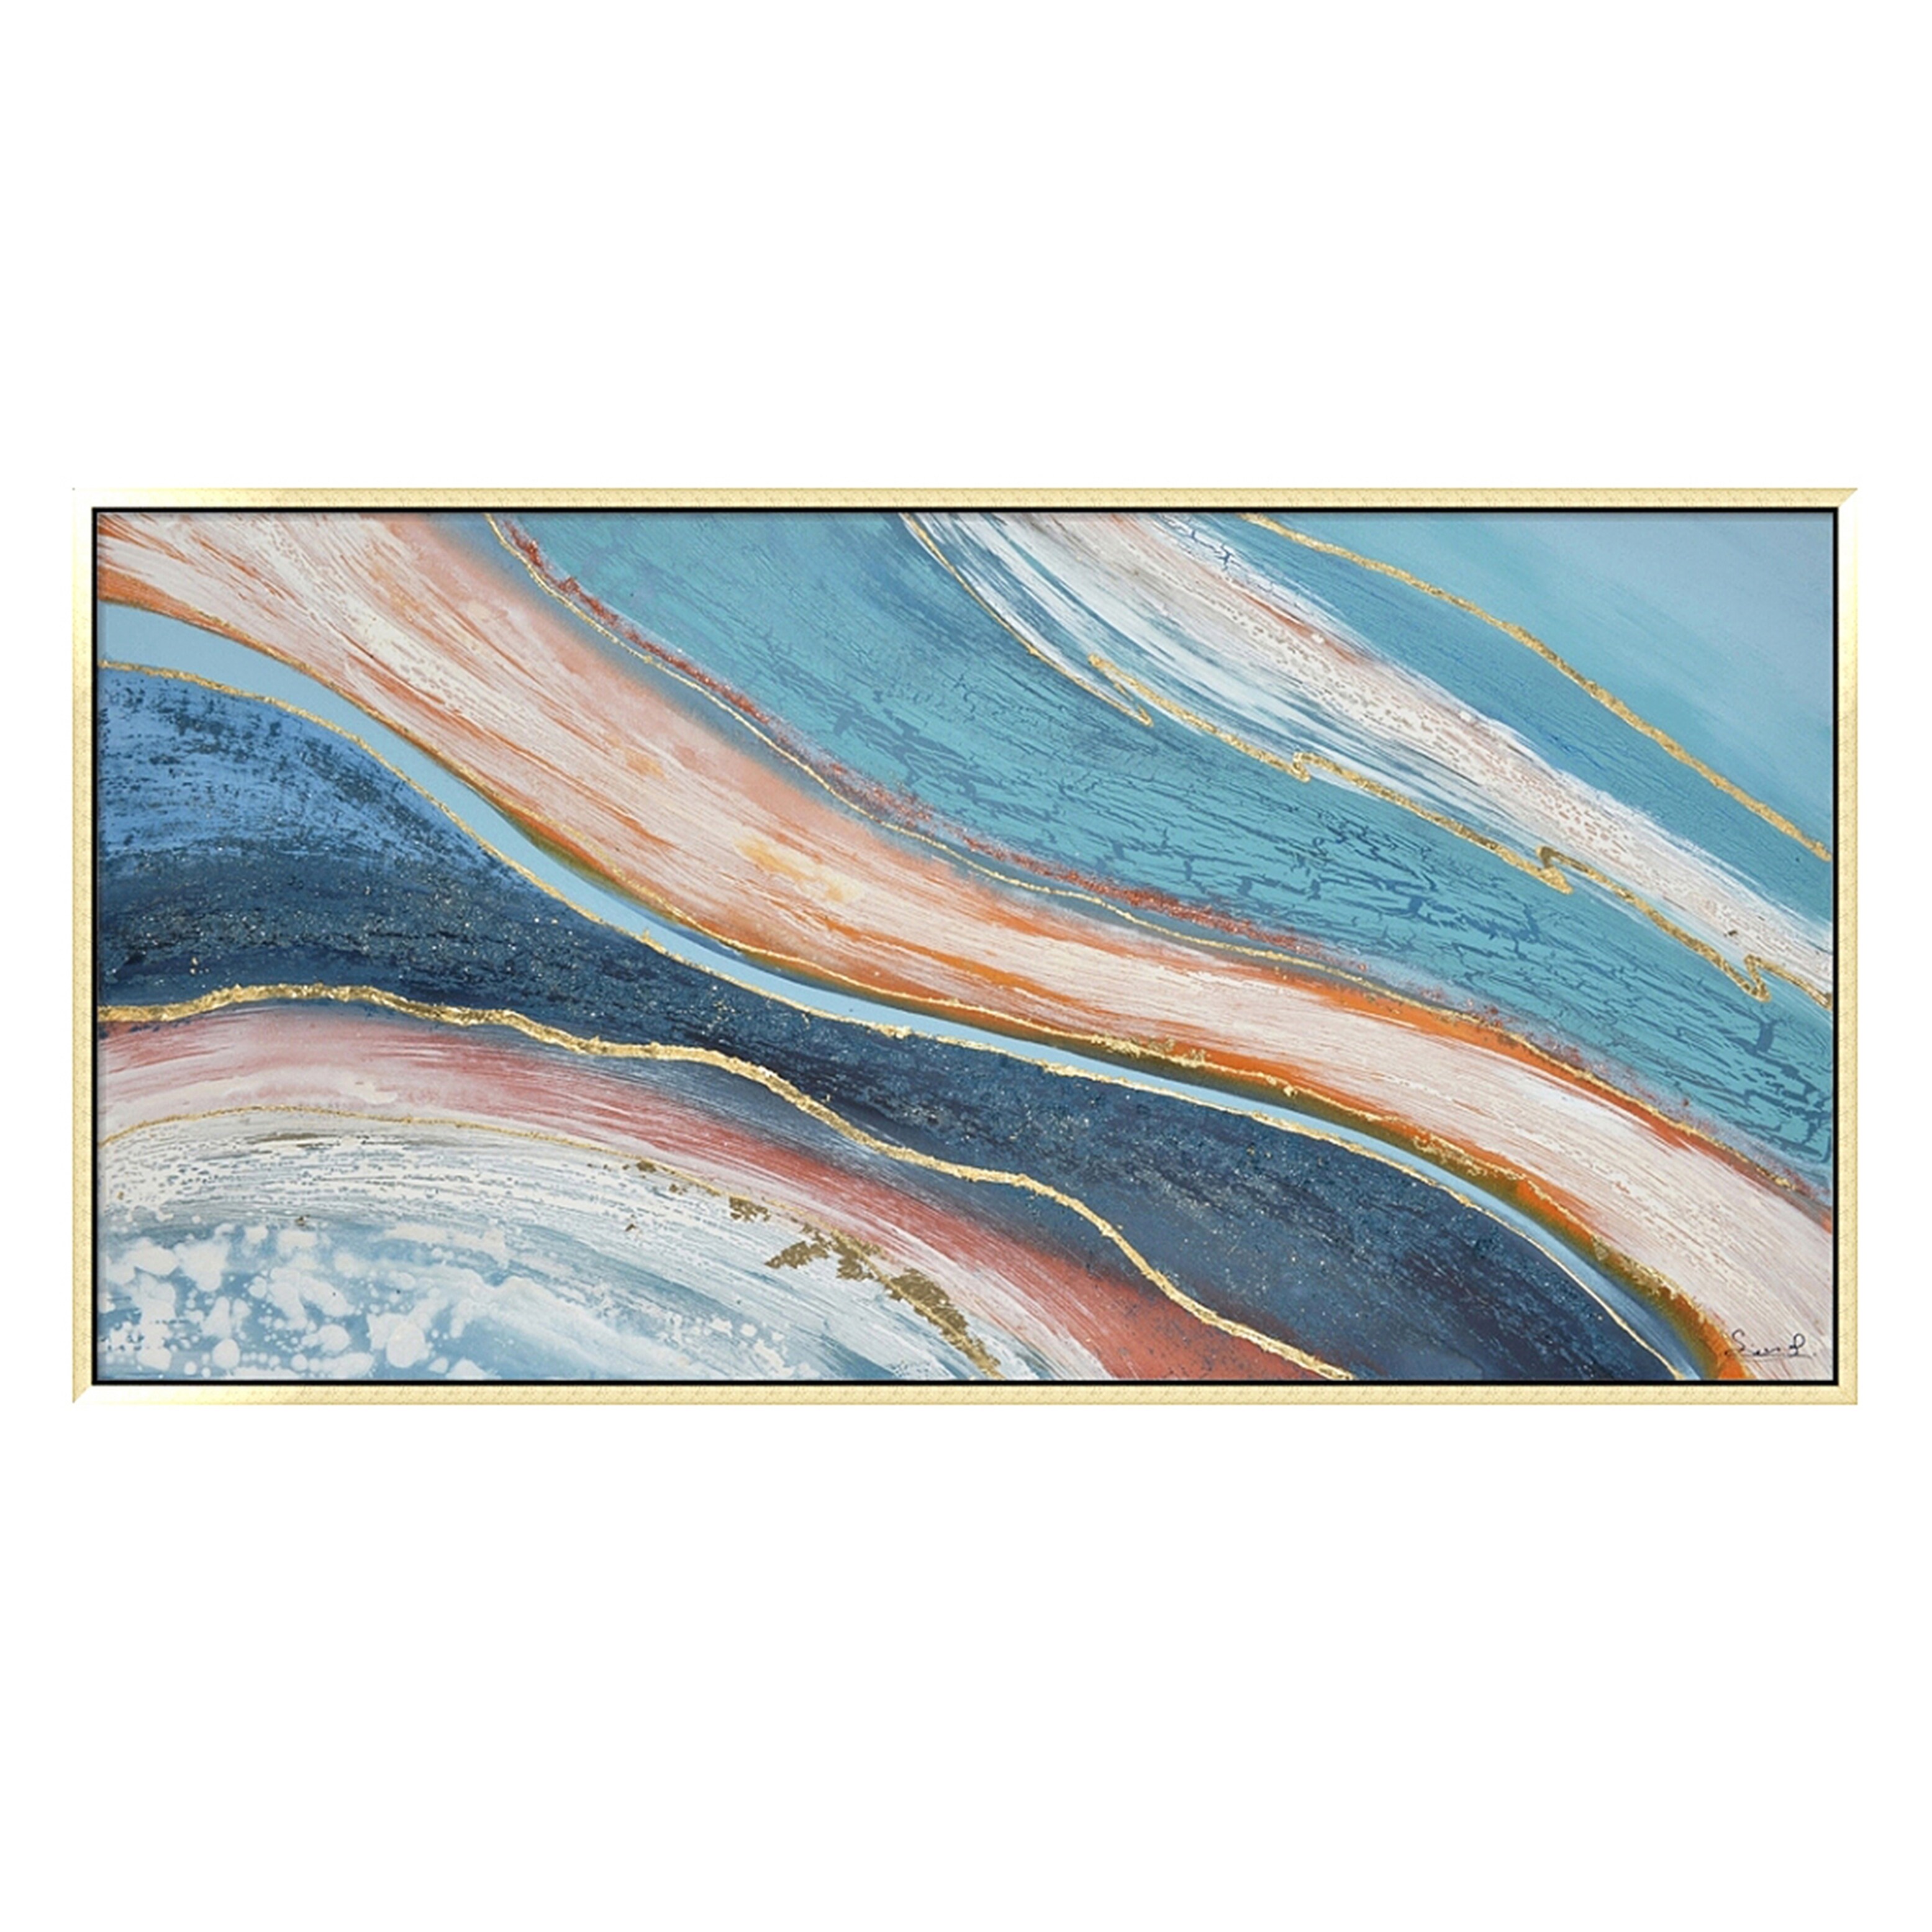 Hand Painted Acrylic Abstract Wall Art Blues and Reds on a 59 x 30 Rectangular Canvas with a Champagne Wooden Frame